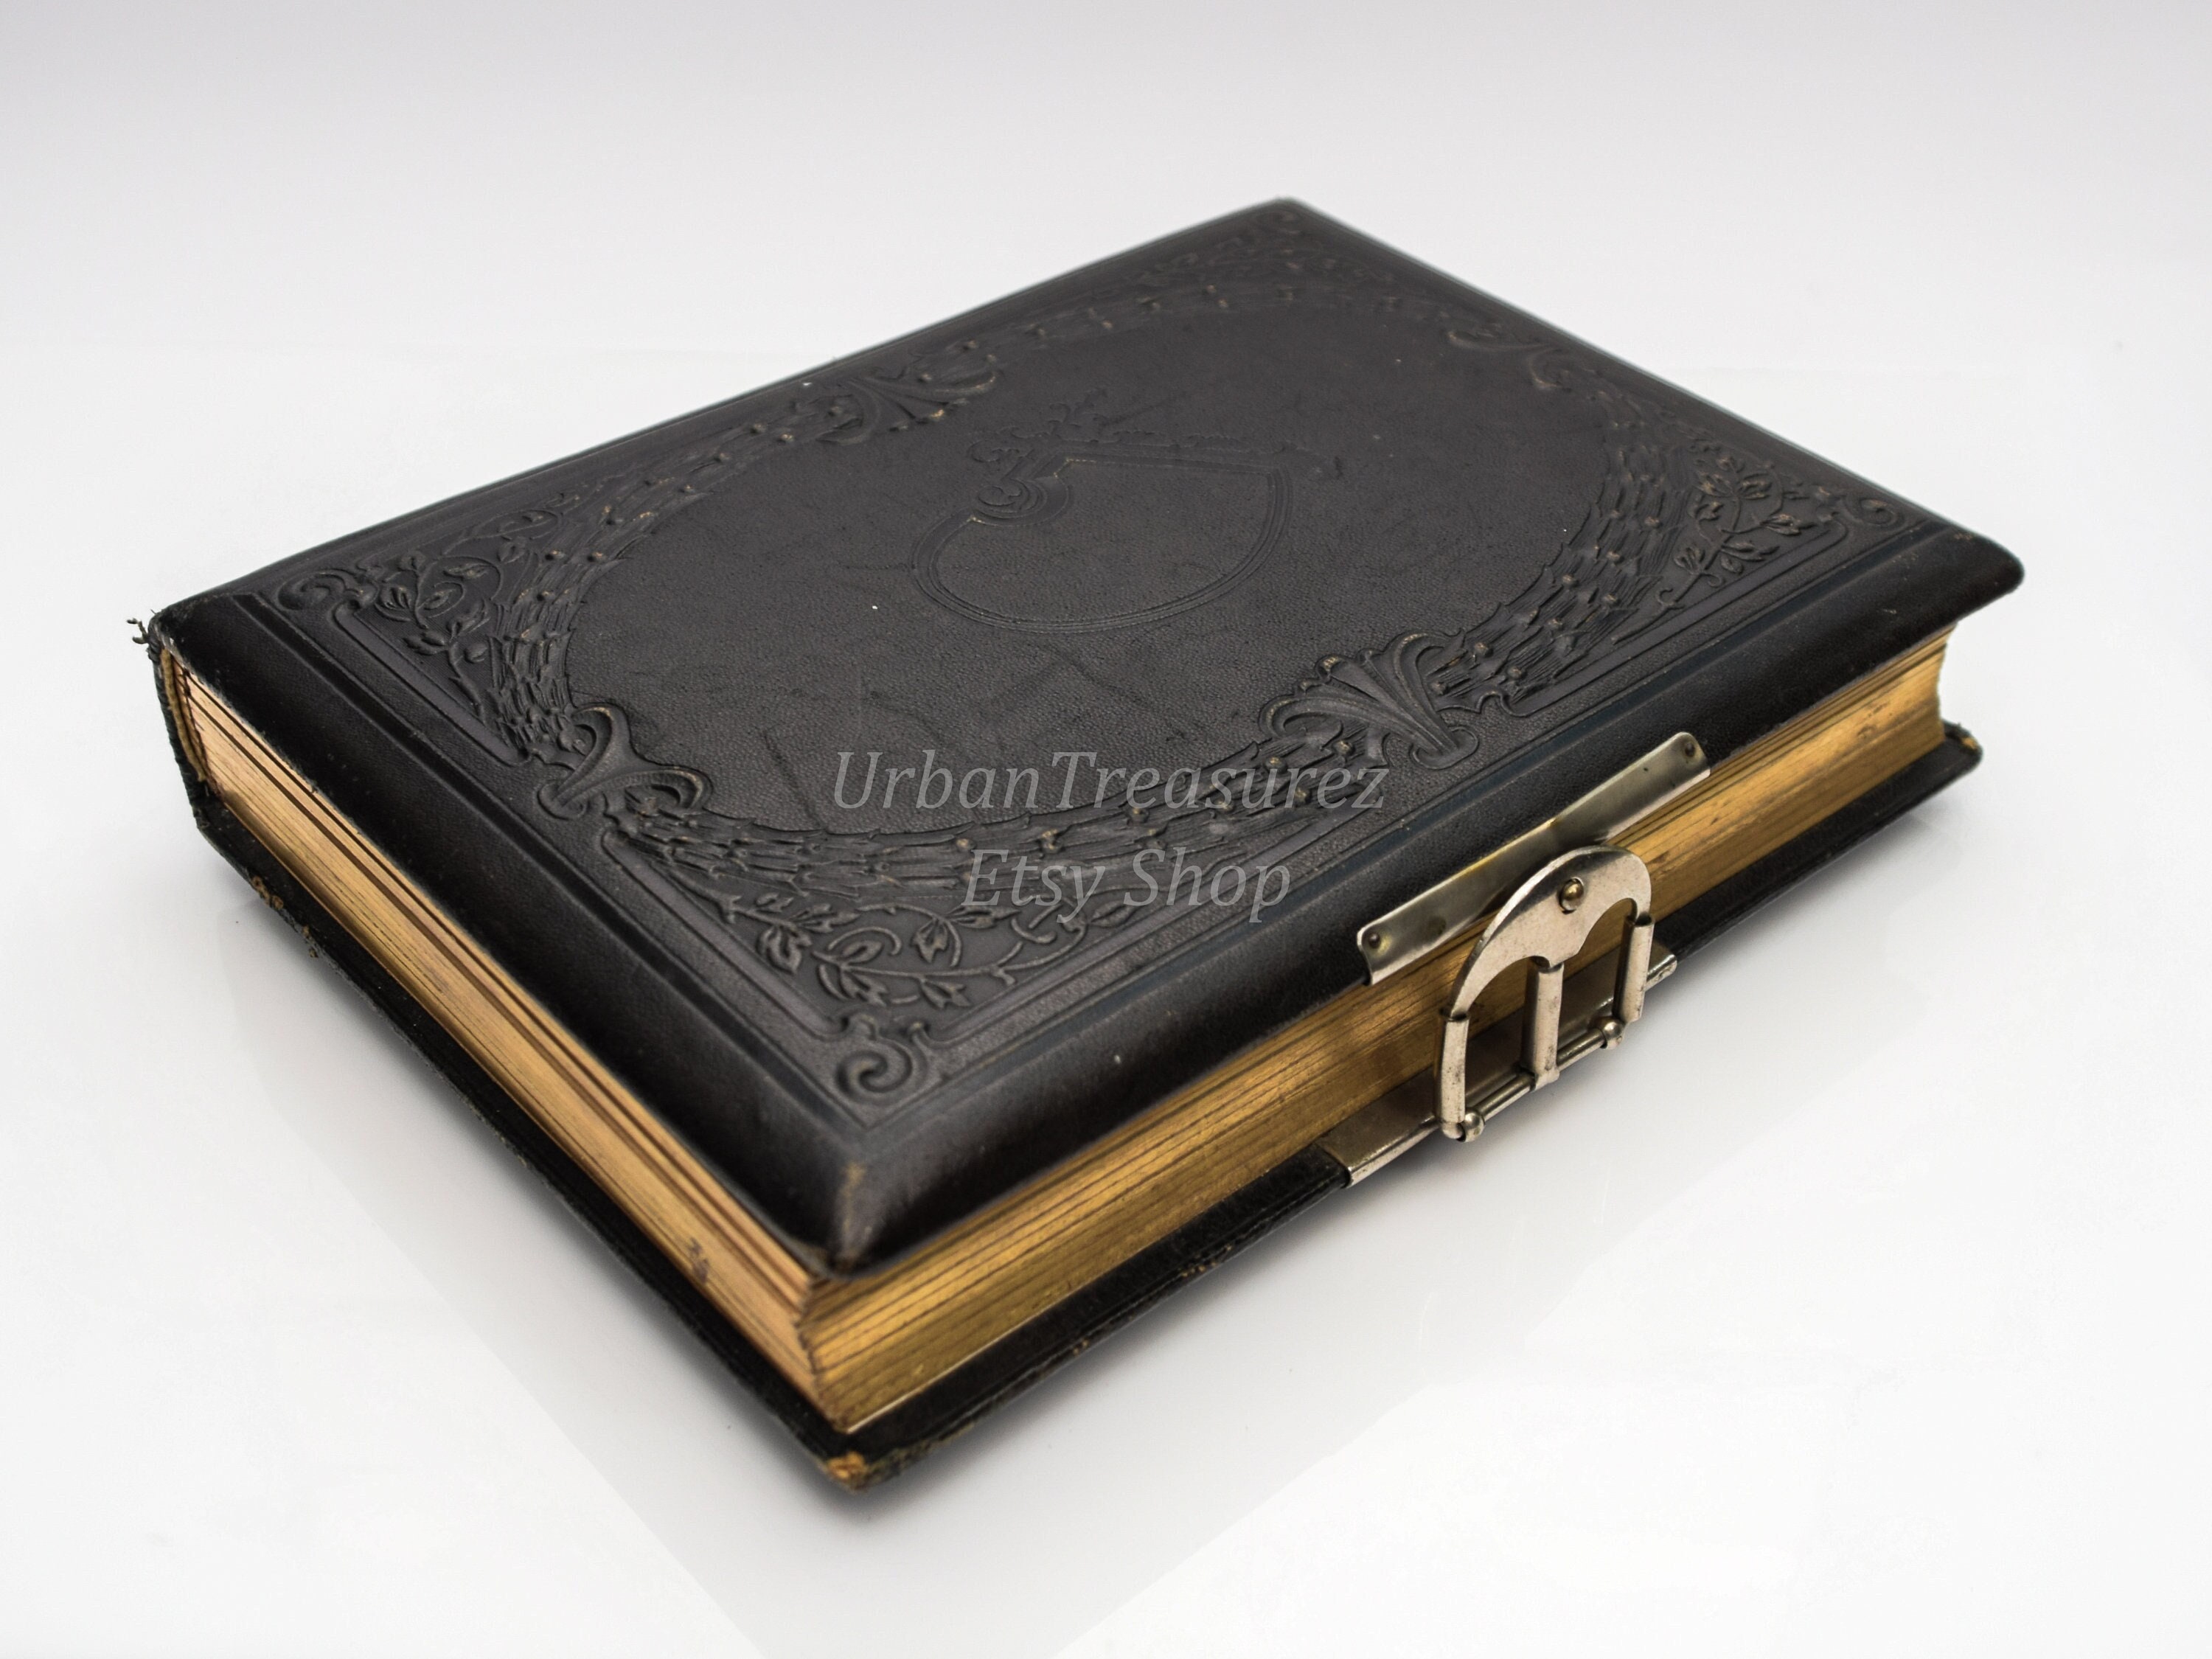 Little Book of LOUIS VUITTON in Luxe Leather by Graphic Image™ - Picture  Frames, Photo Albums, Personalized and Engraved Digital Photo Gifts -  SendAFrame